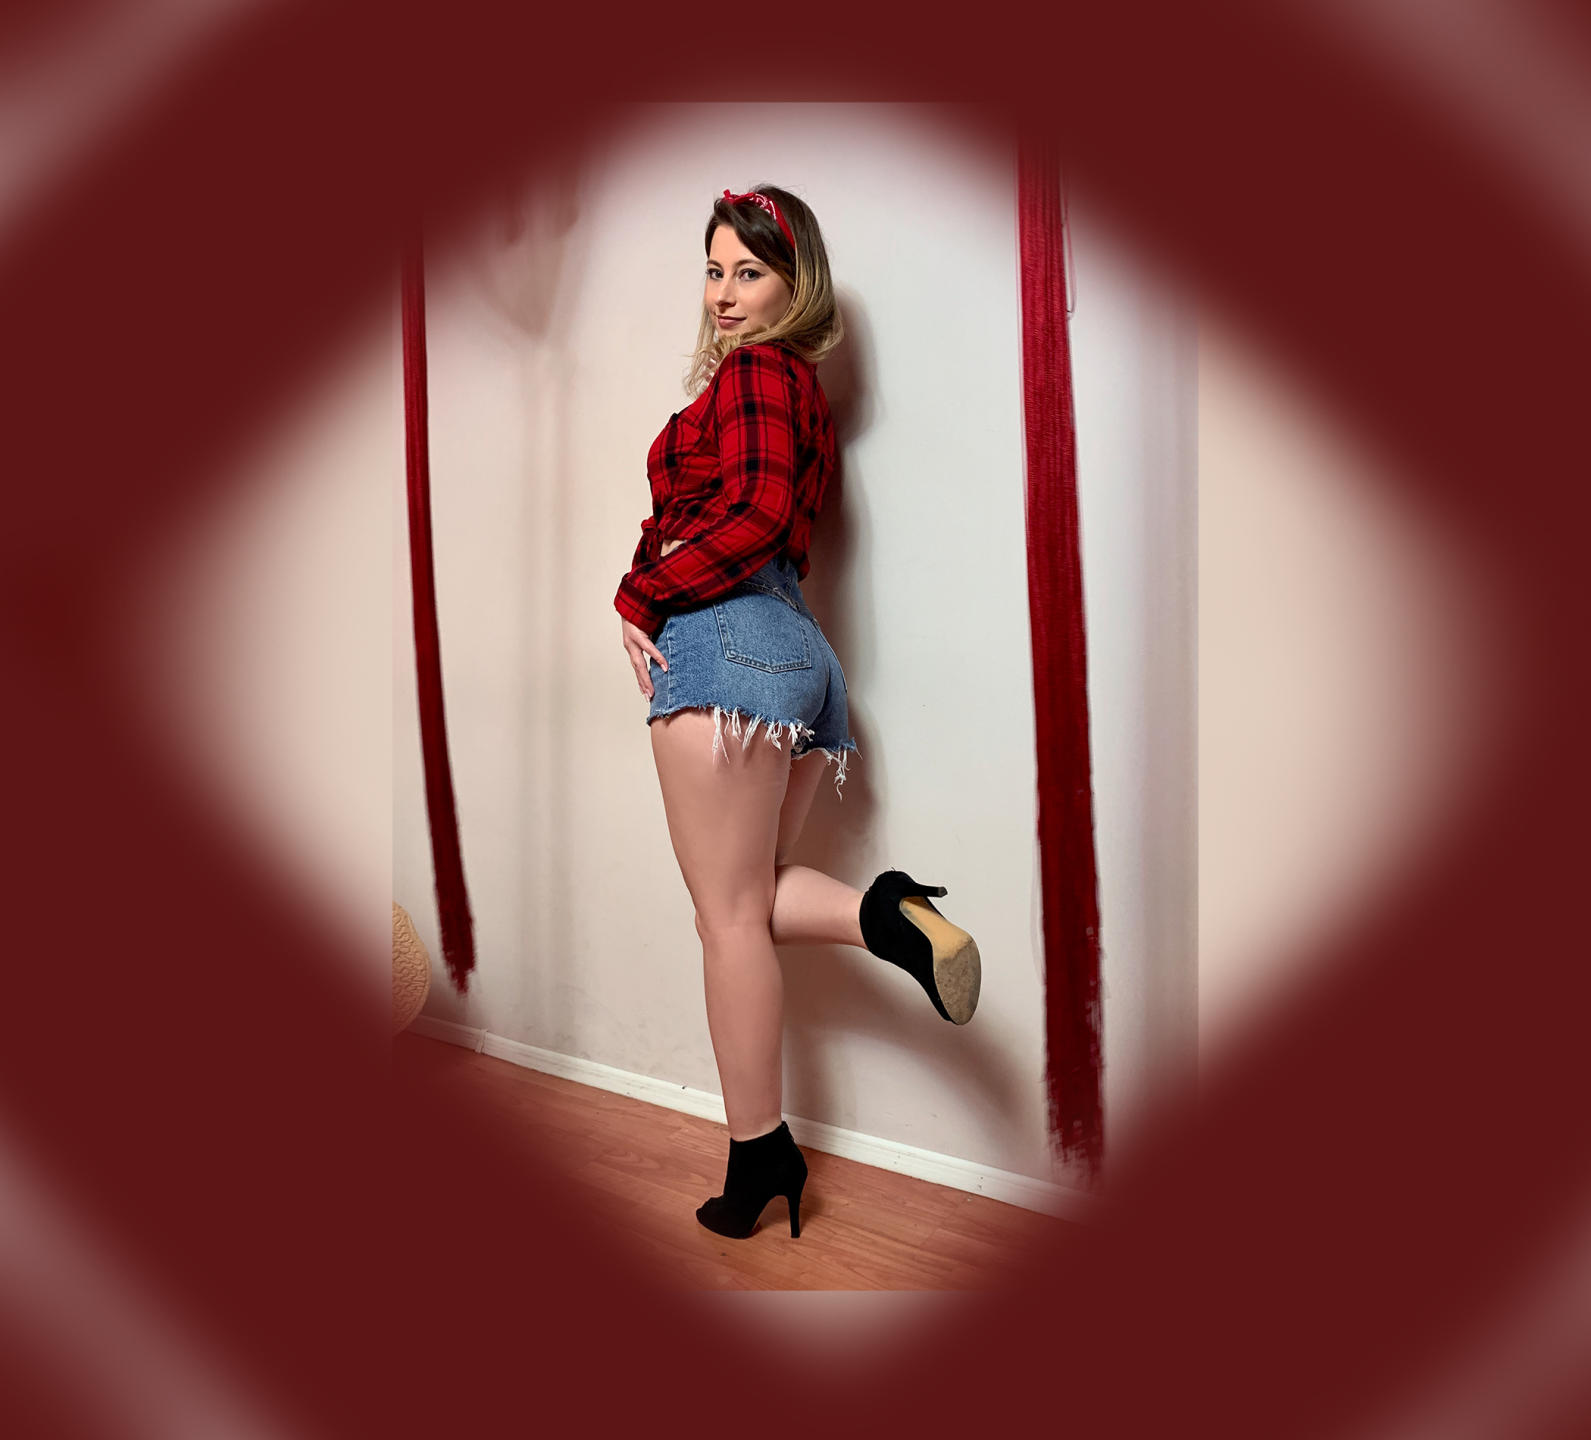 Image of cam model DeliceSmille from XloveCam